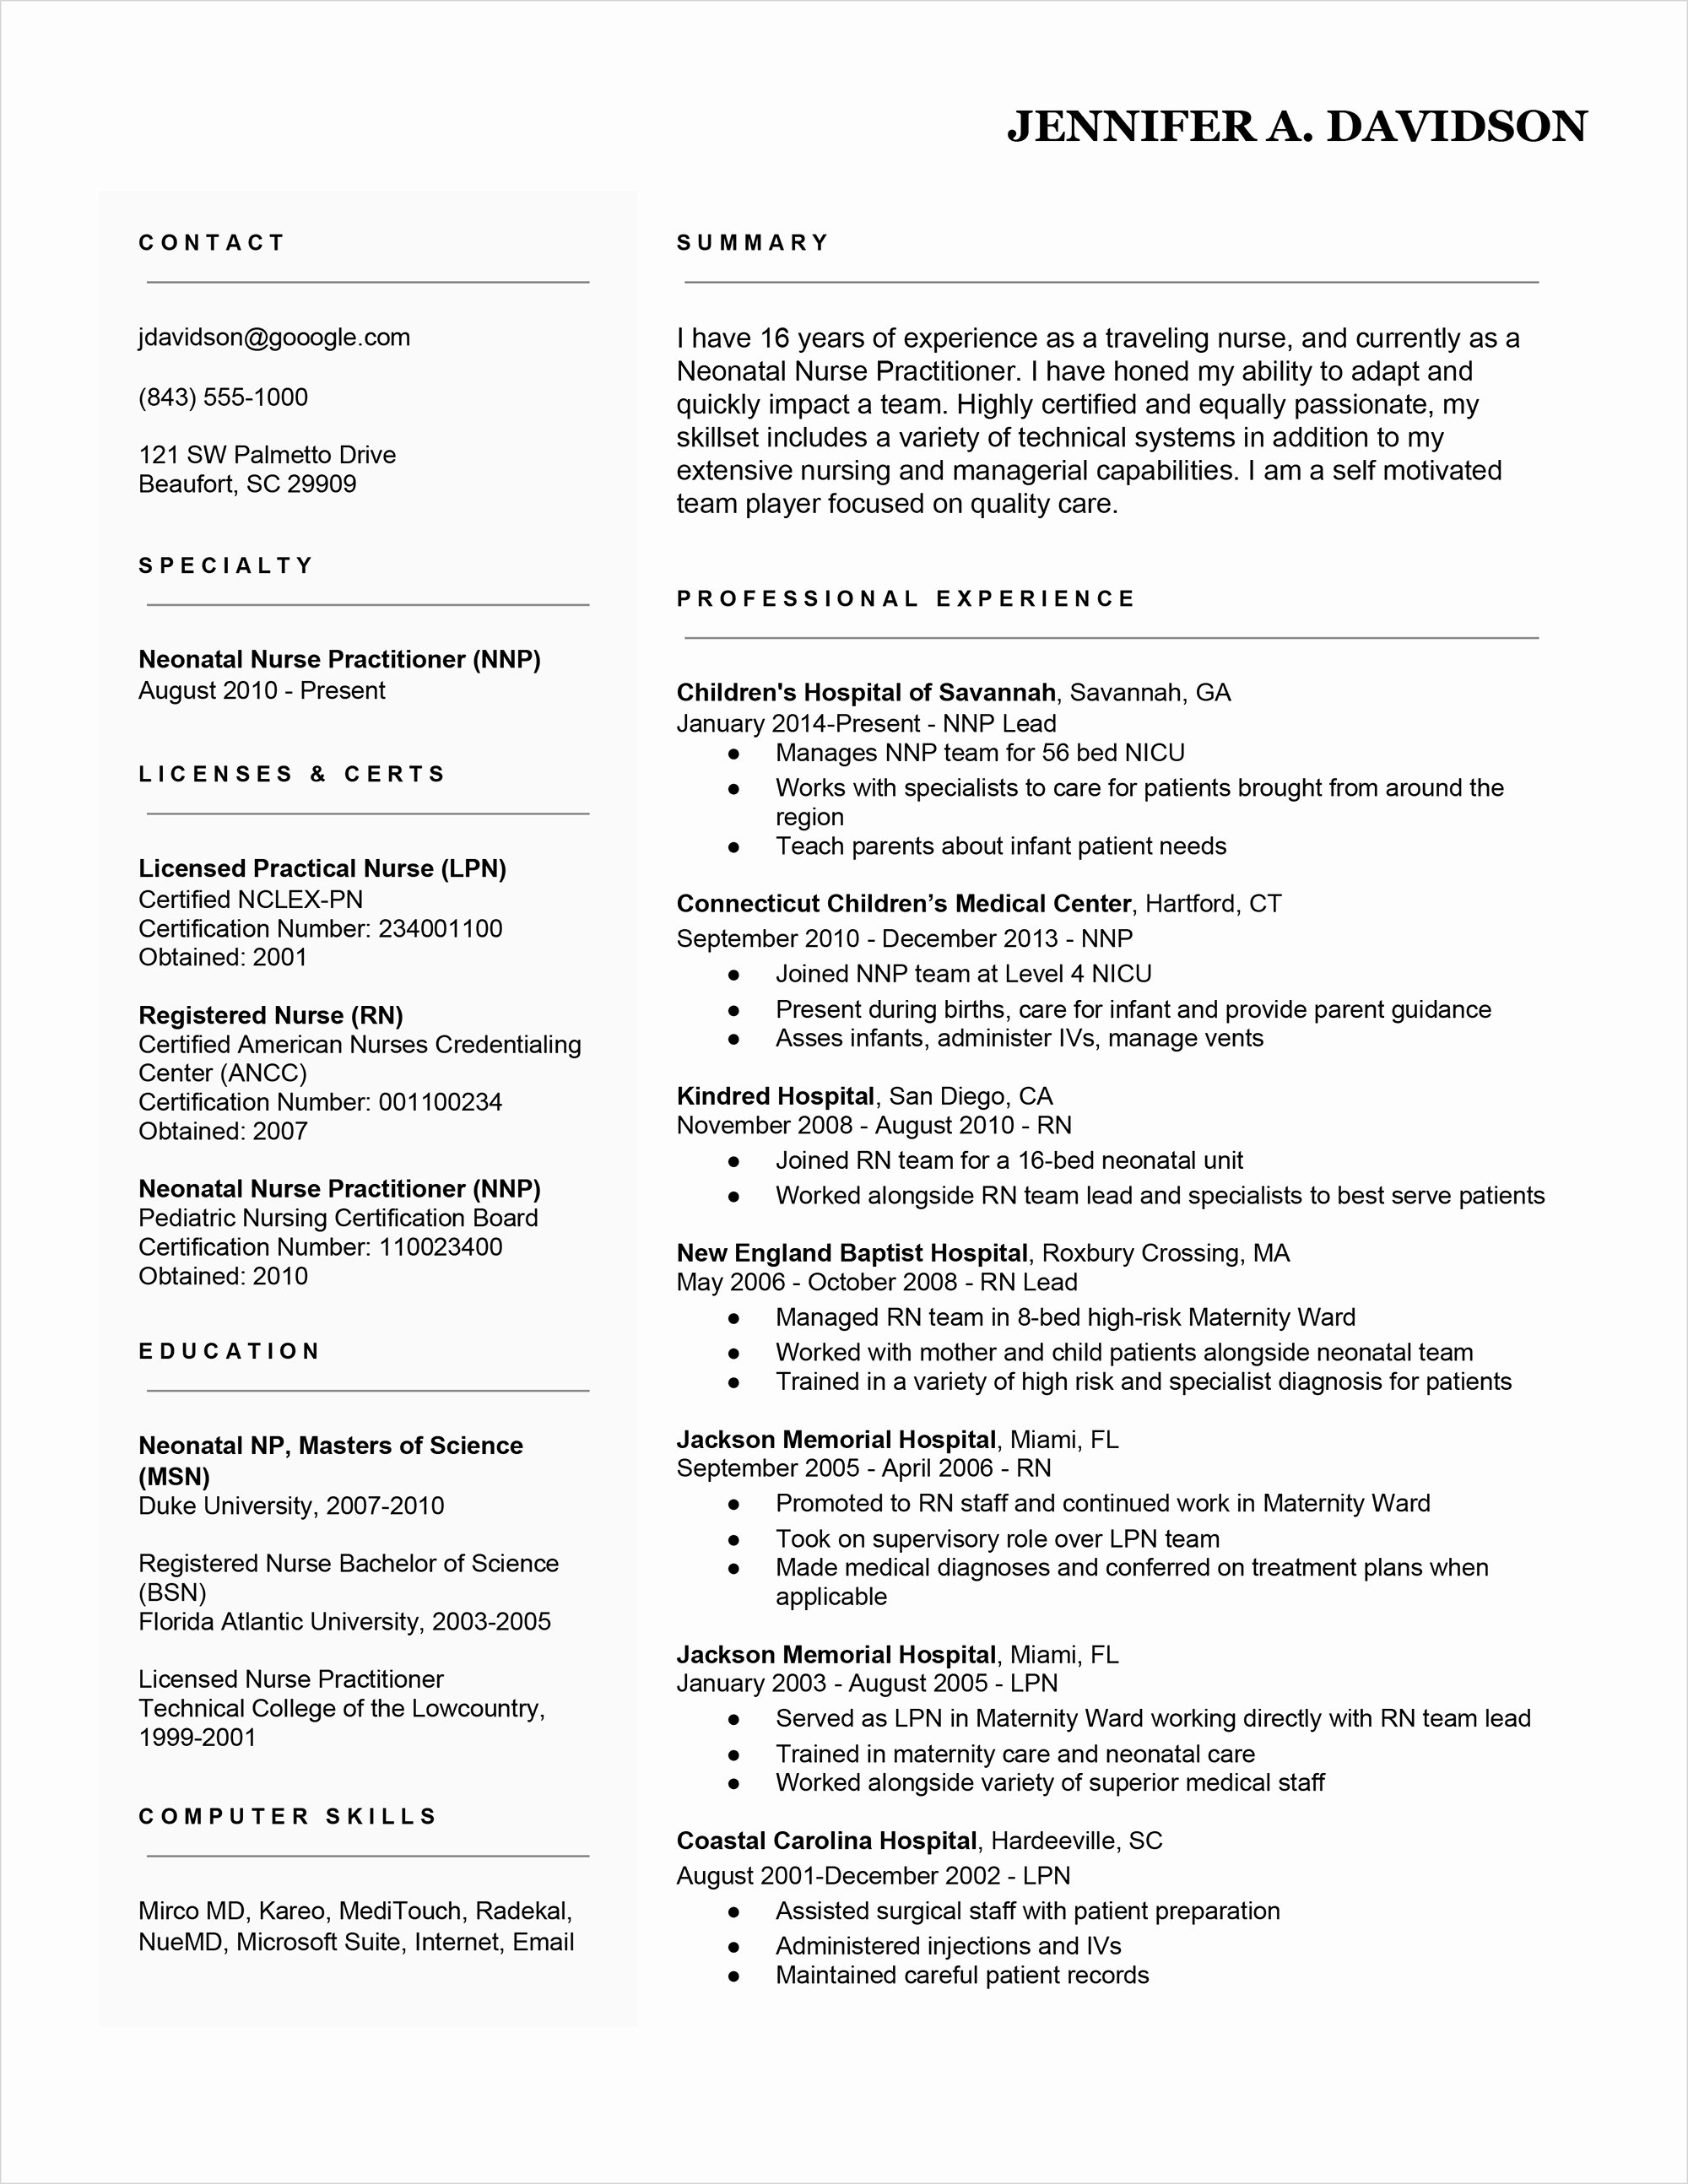 Travel Nurse Resume Examples 7 Secrets for Standing Out